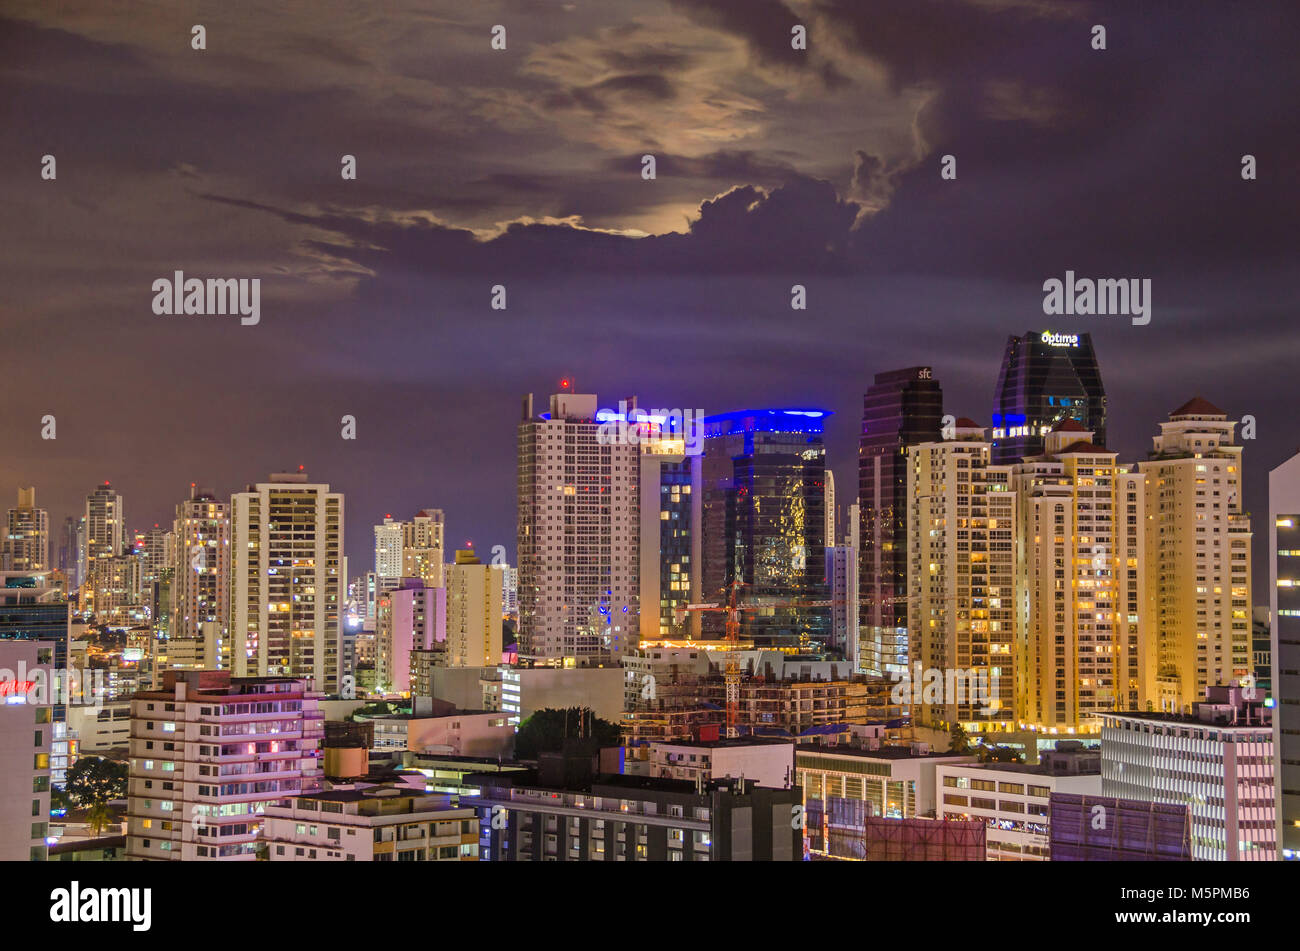 Panama City, Panama - November 4, 2017: Skyline of Panama City at night. View from the roof of the hotel Tryp by Windham. Stock Photo